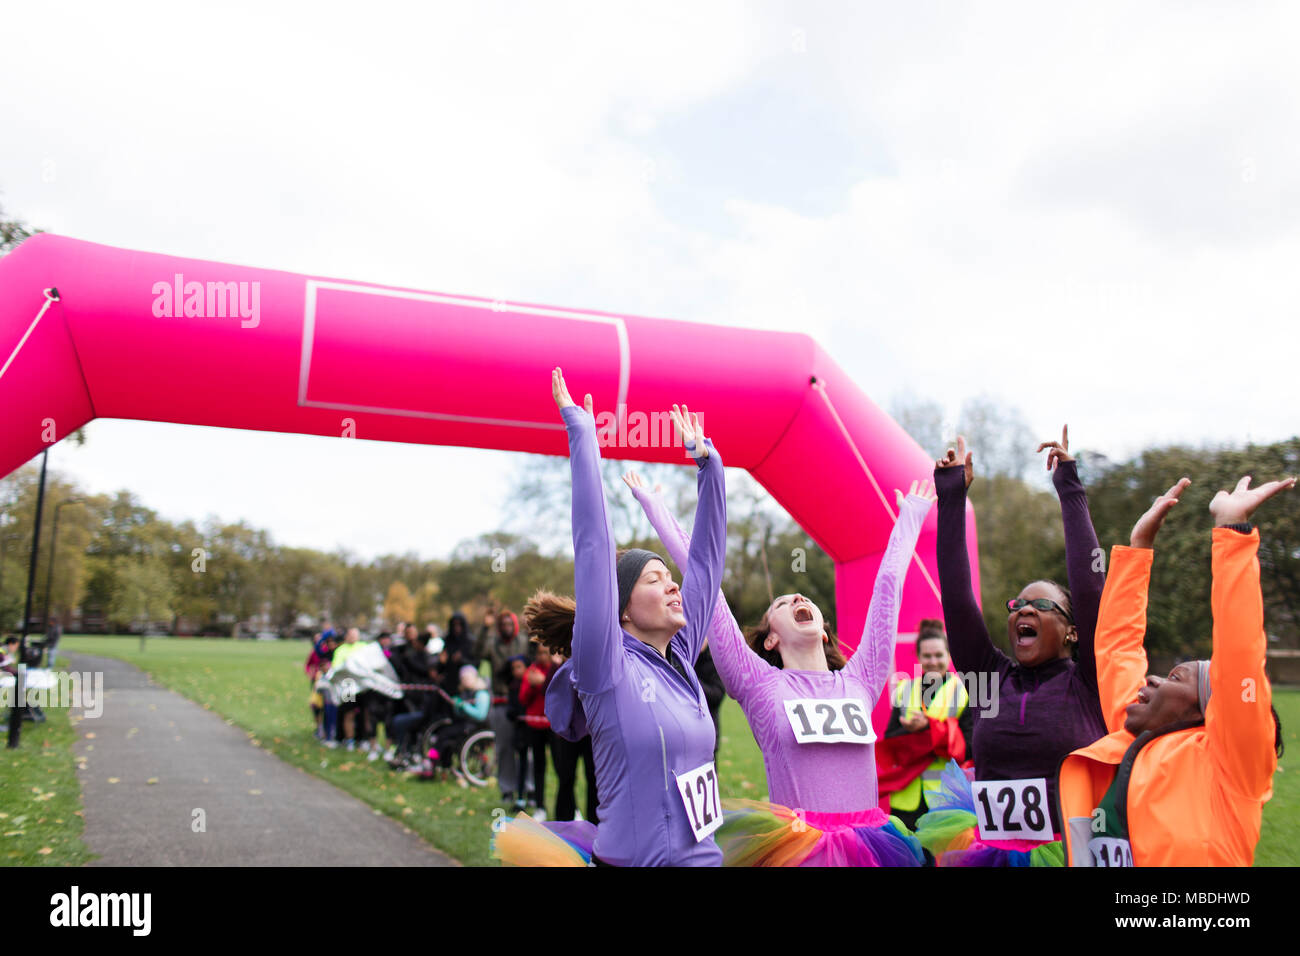 Enthusiastic female runners in tutus cheering, celebrating at charity run finish line Stock Photo